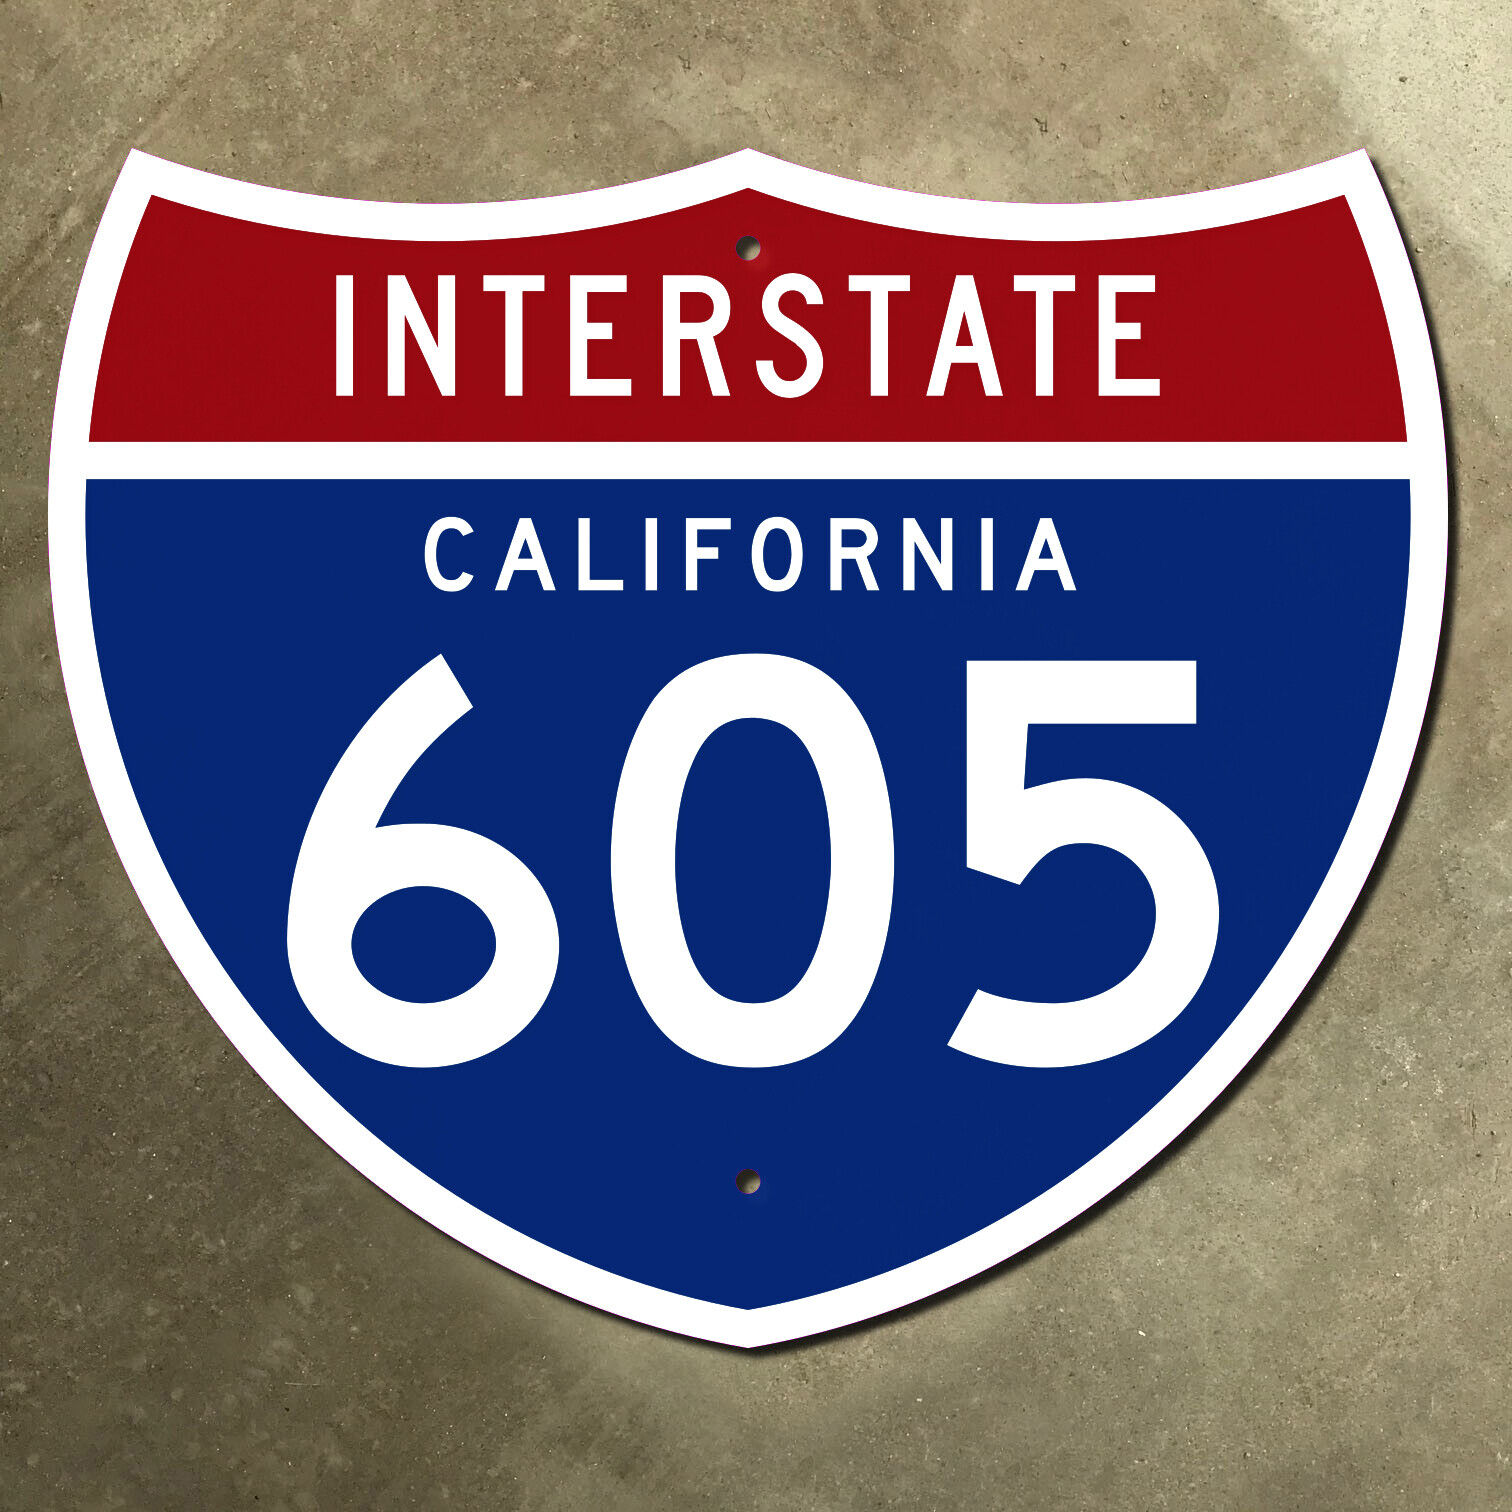 California interstate route 605 highway marker road sign Los Angeles 1961 21x18